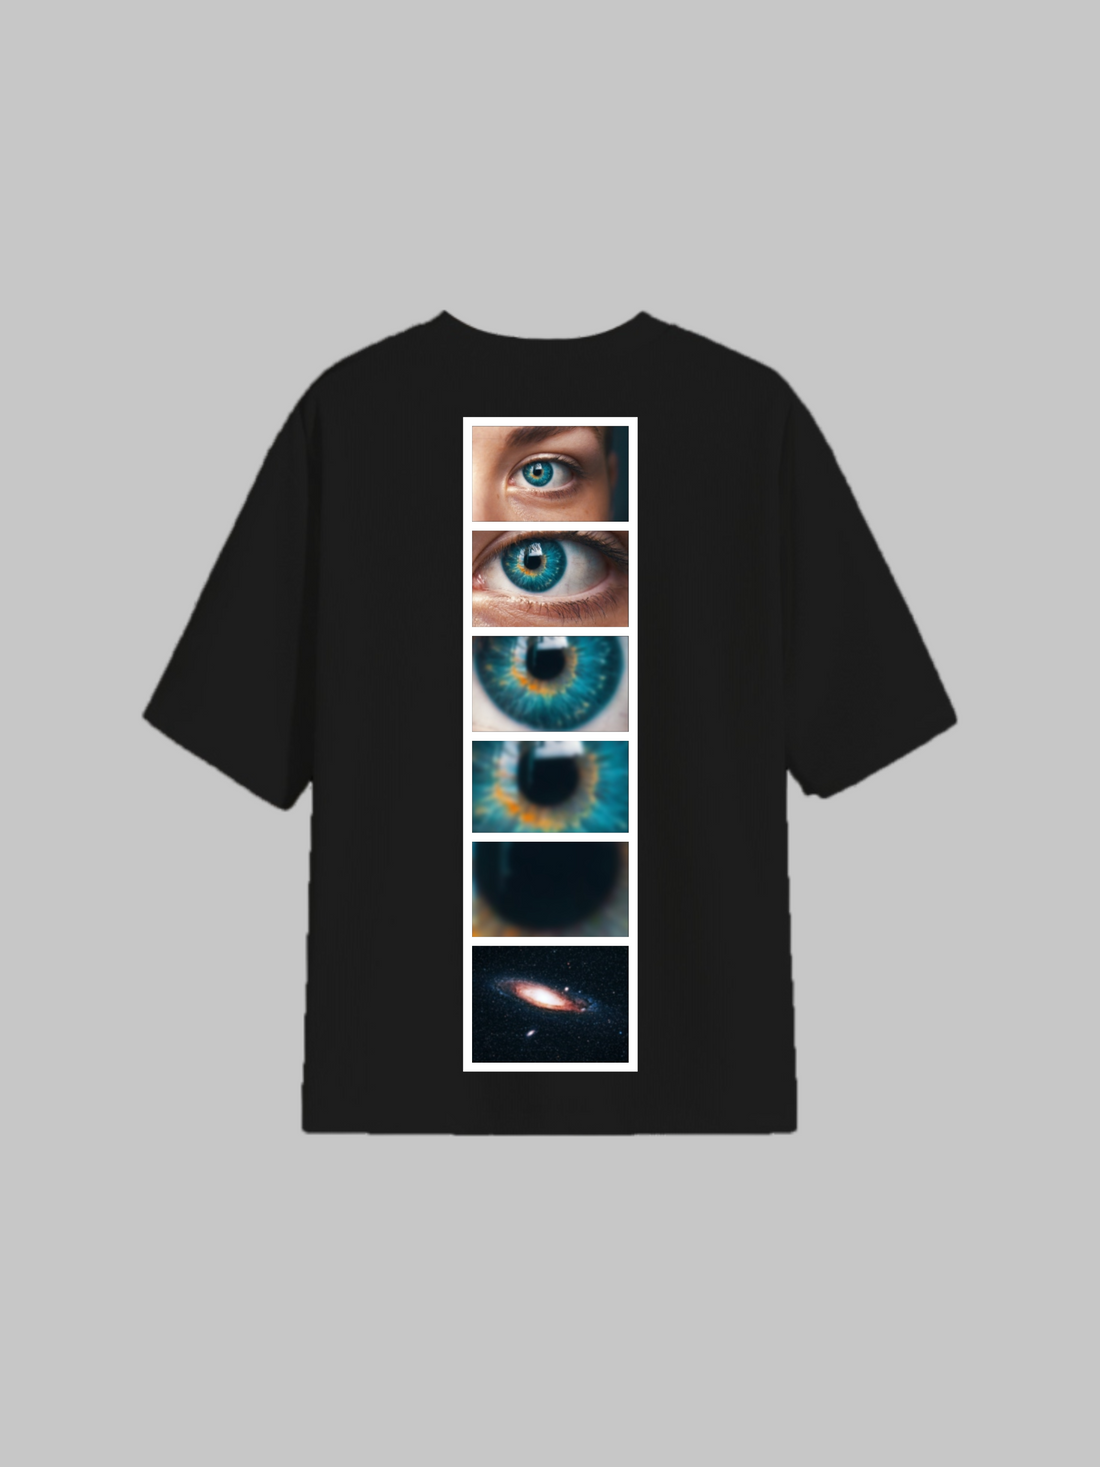 The deeper look - Vision Drop Sleeved  tee   For Men and Women